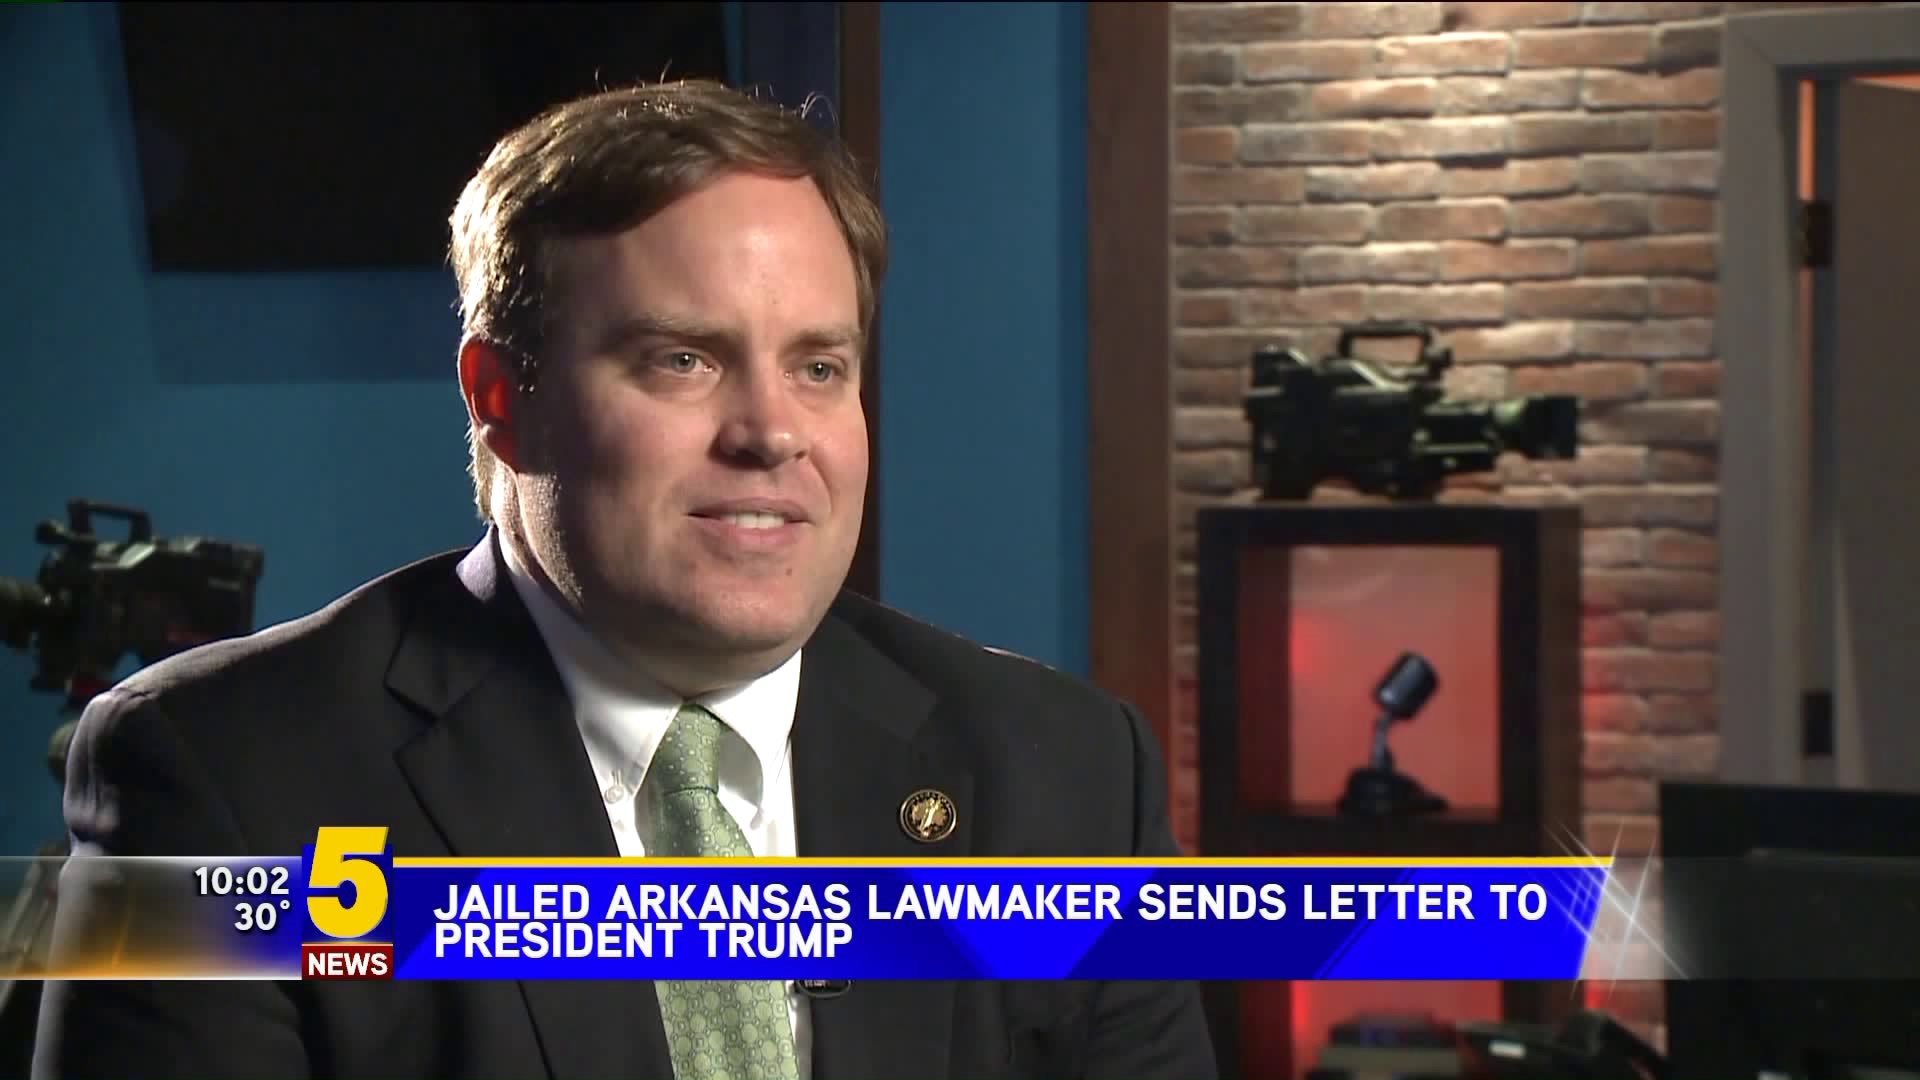 Jailed Arkansas Lawmaker Sends Letter To President Trump Saying Inmates Wanna Help "Build The Wall"